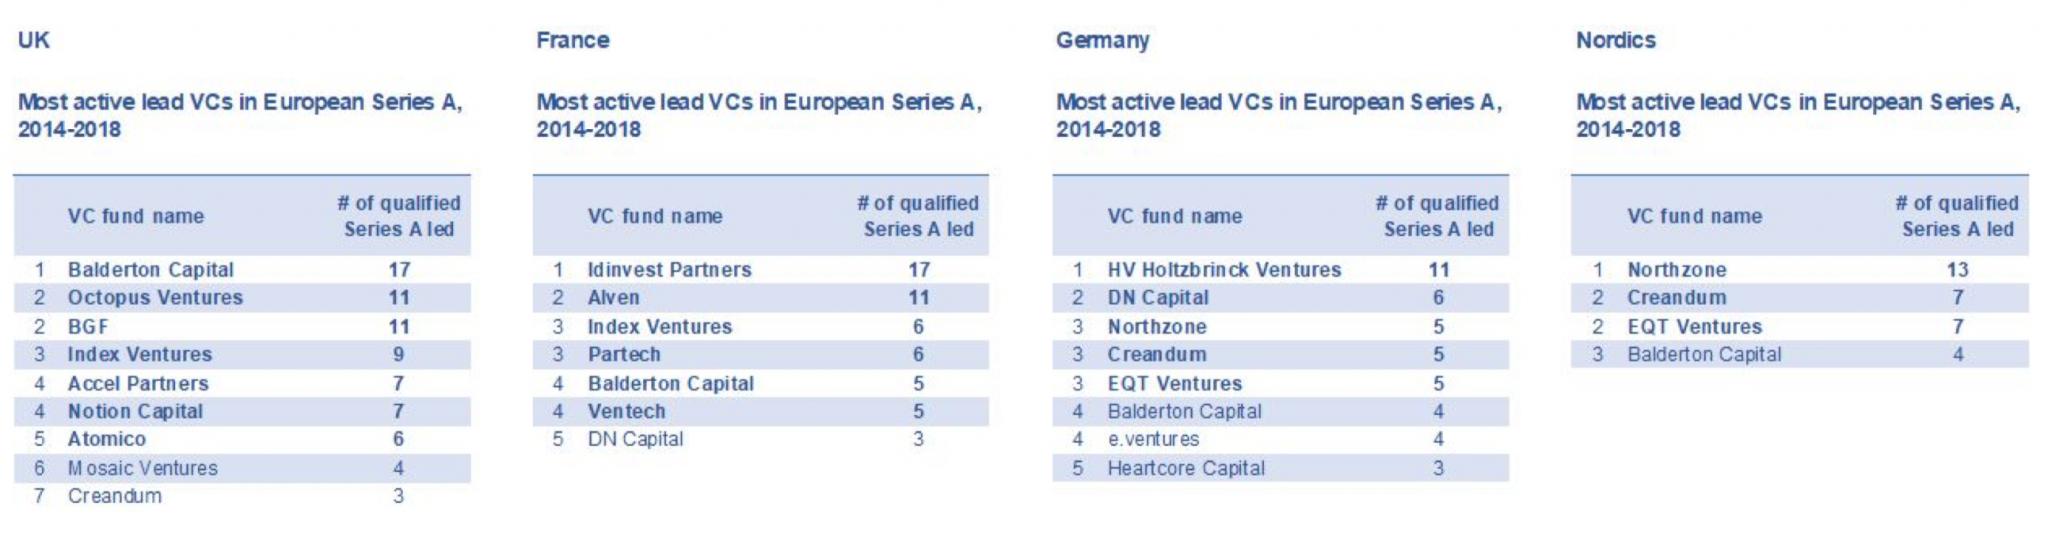 list of Lists of the most active lead VCs broken down by country